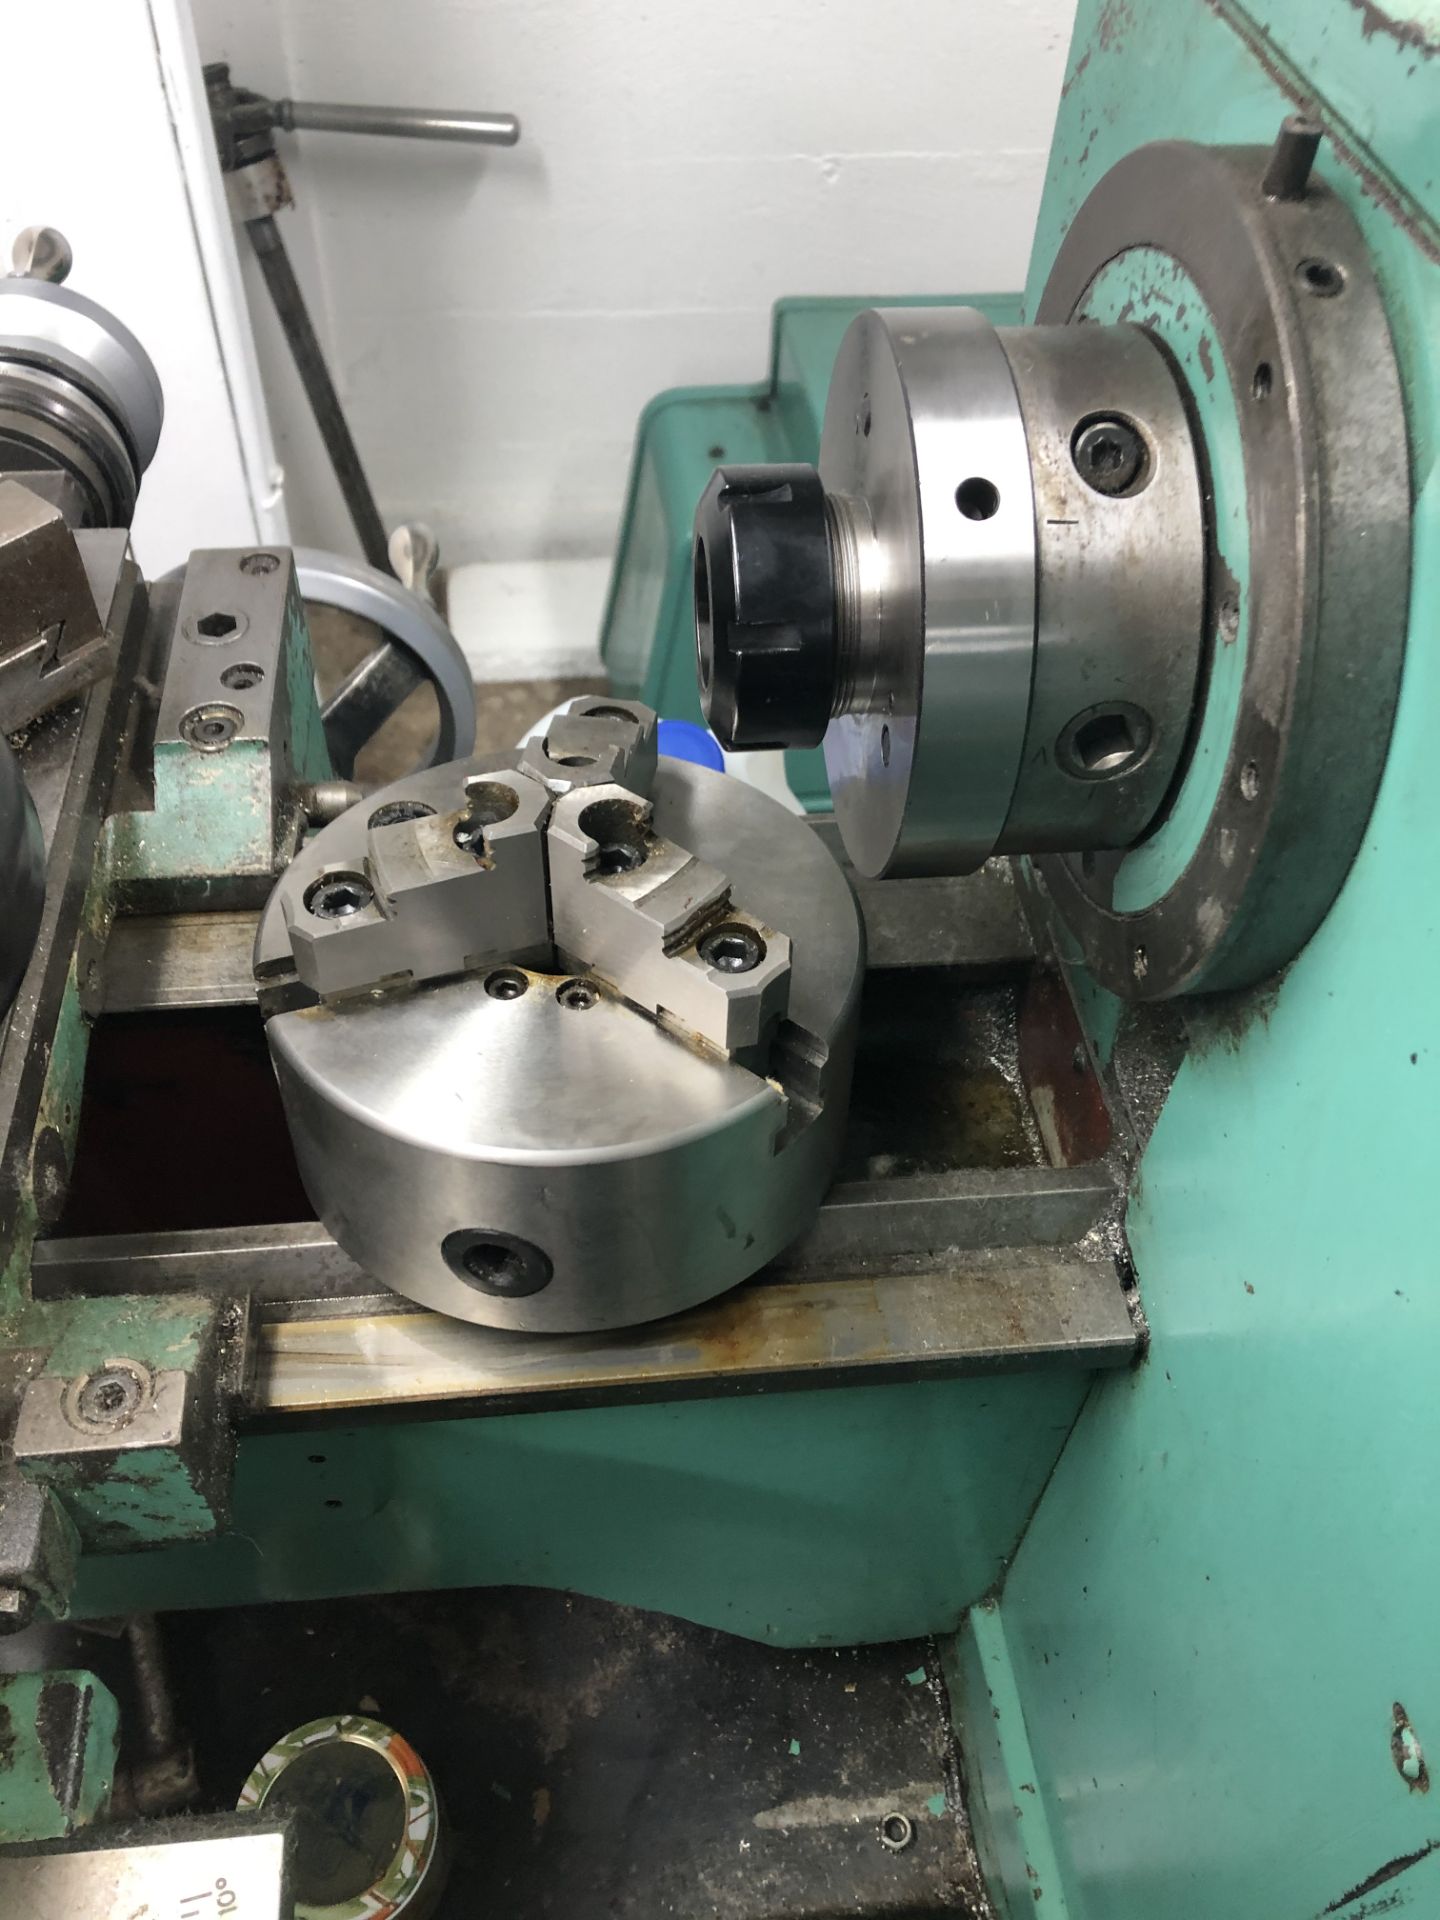 Harrison AA Lathe 25" Centers, 1.5" Spindle Bore 3000 RPM   Please call 971-206-0017 to preview. - Image 5 of 32